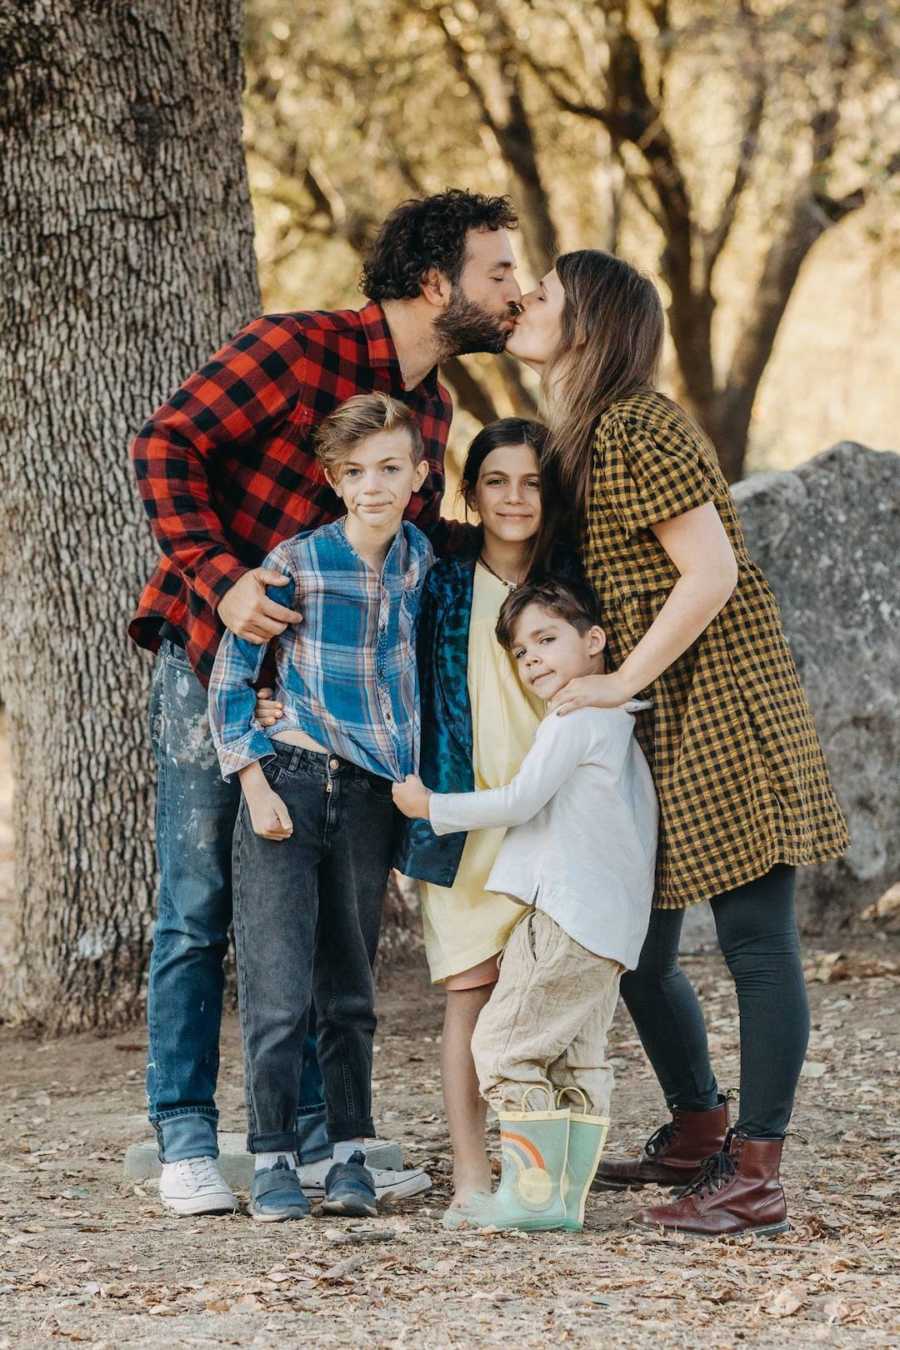 Family of five with children in front and parents kissing behind them